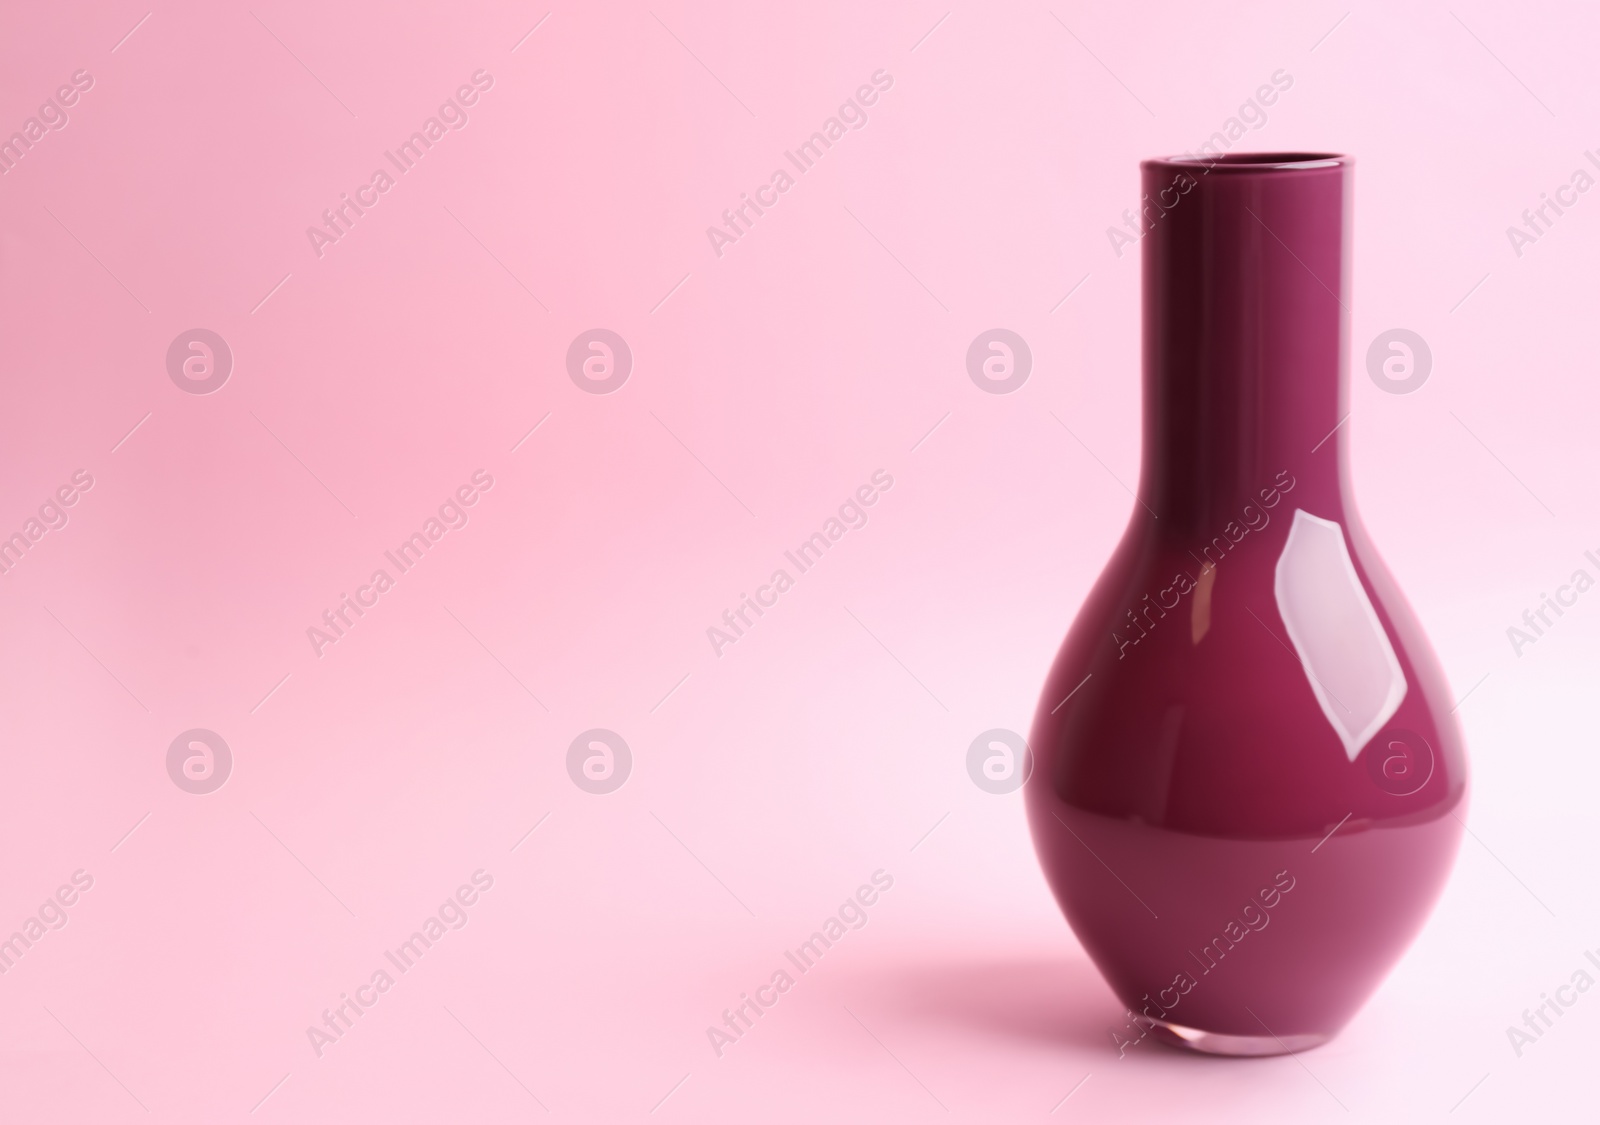 Photo of Stylish empty ceramic vase on pink background, space for text